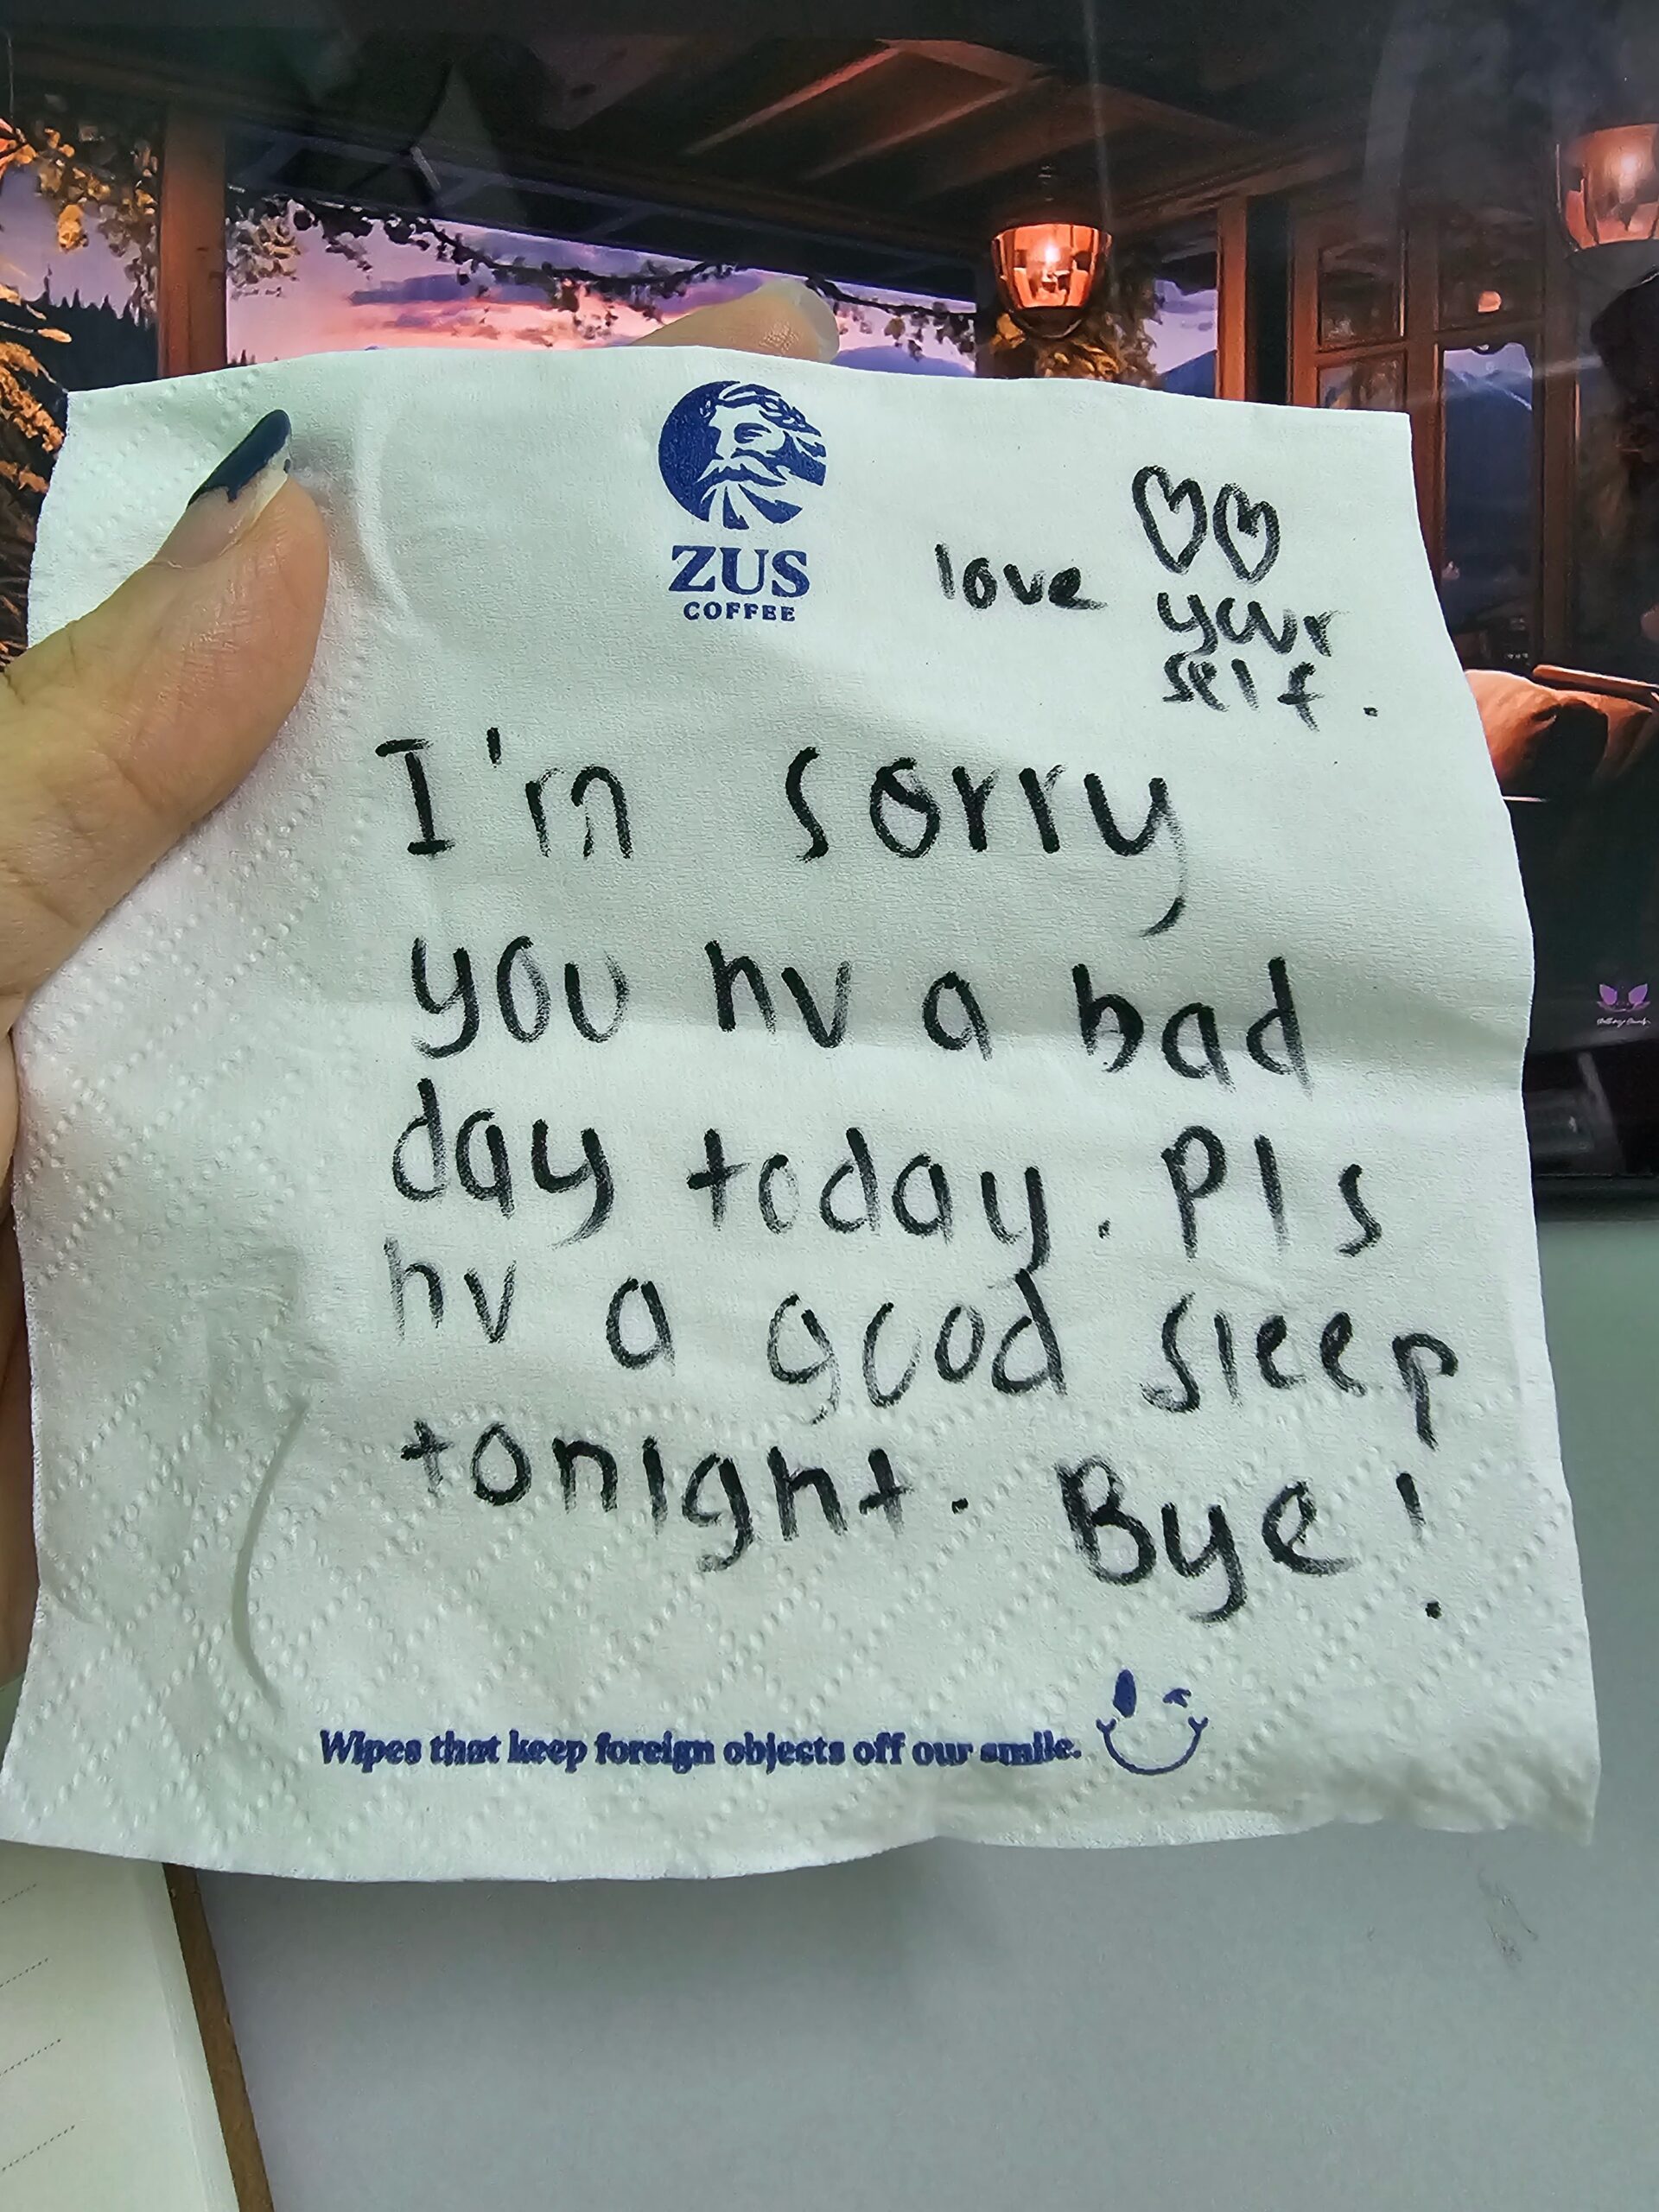 M'sian woman touched by heartwarming note from zus coffee staff who noticed she was sad 